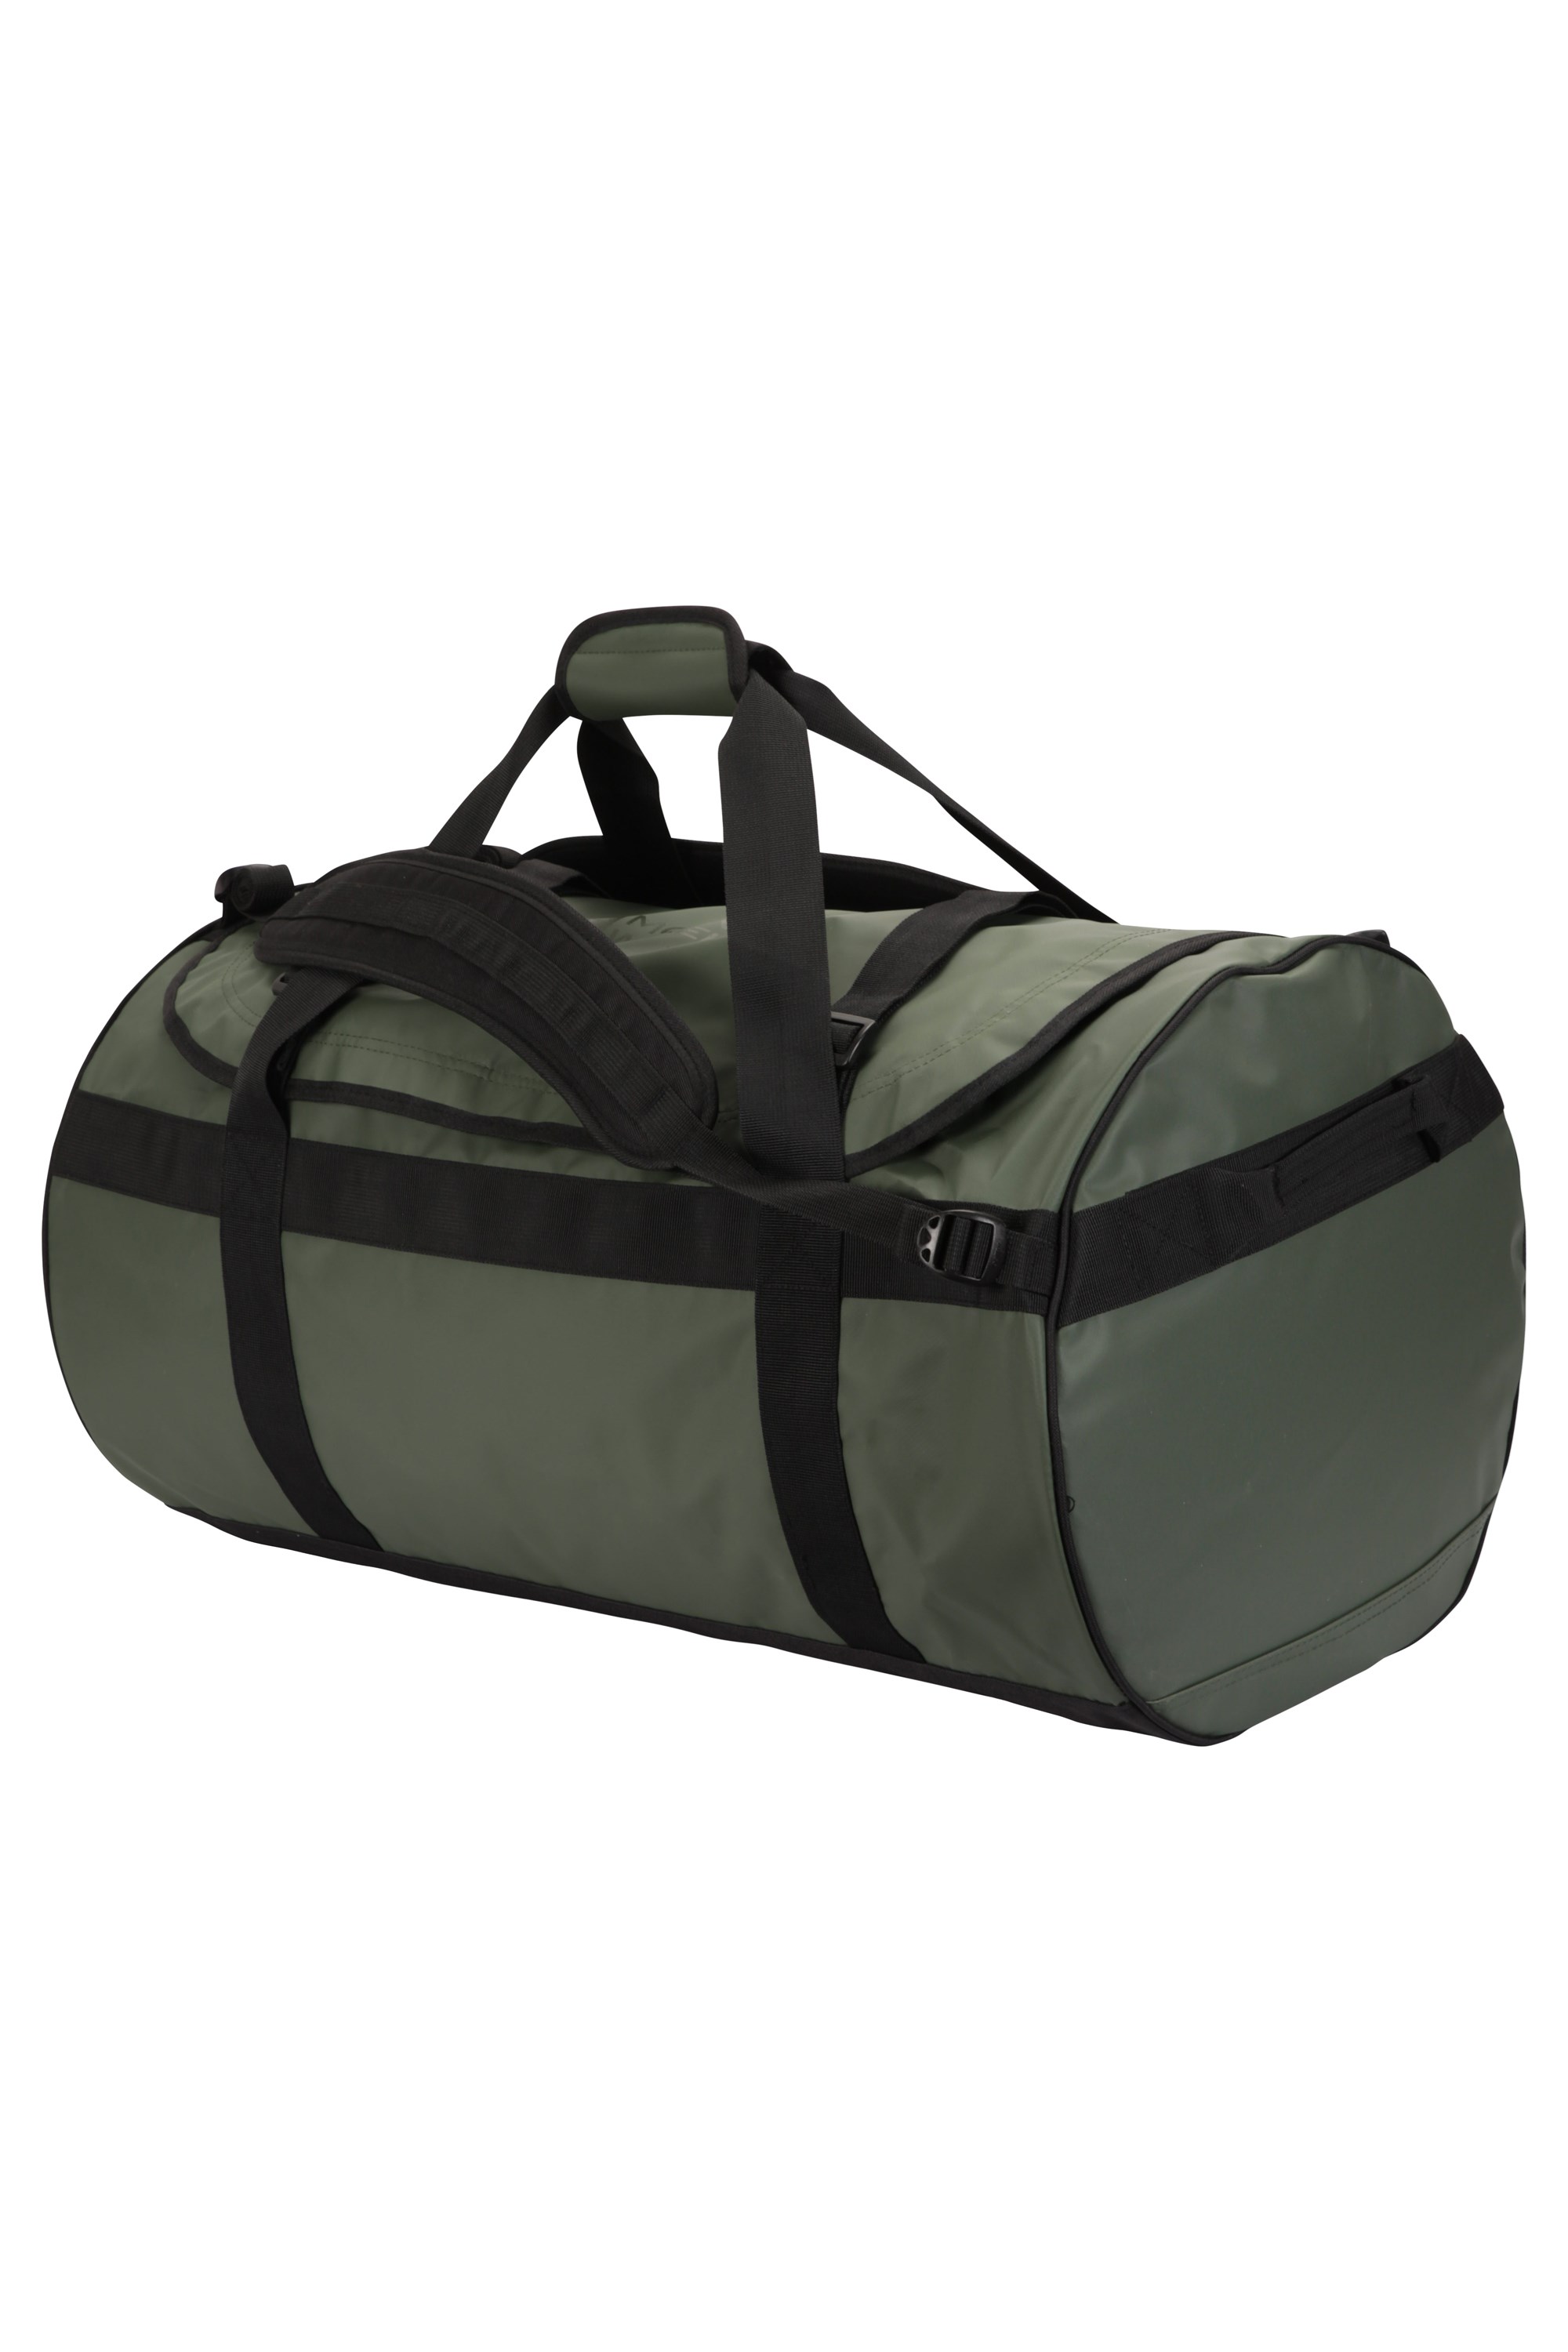 for Travel Black Mountain Warehouse Voyager 90L Wheelie Holdall Duffle Bag 